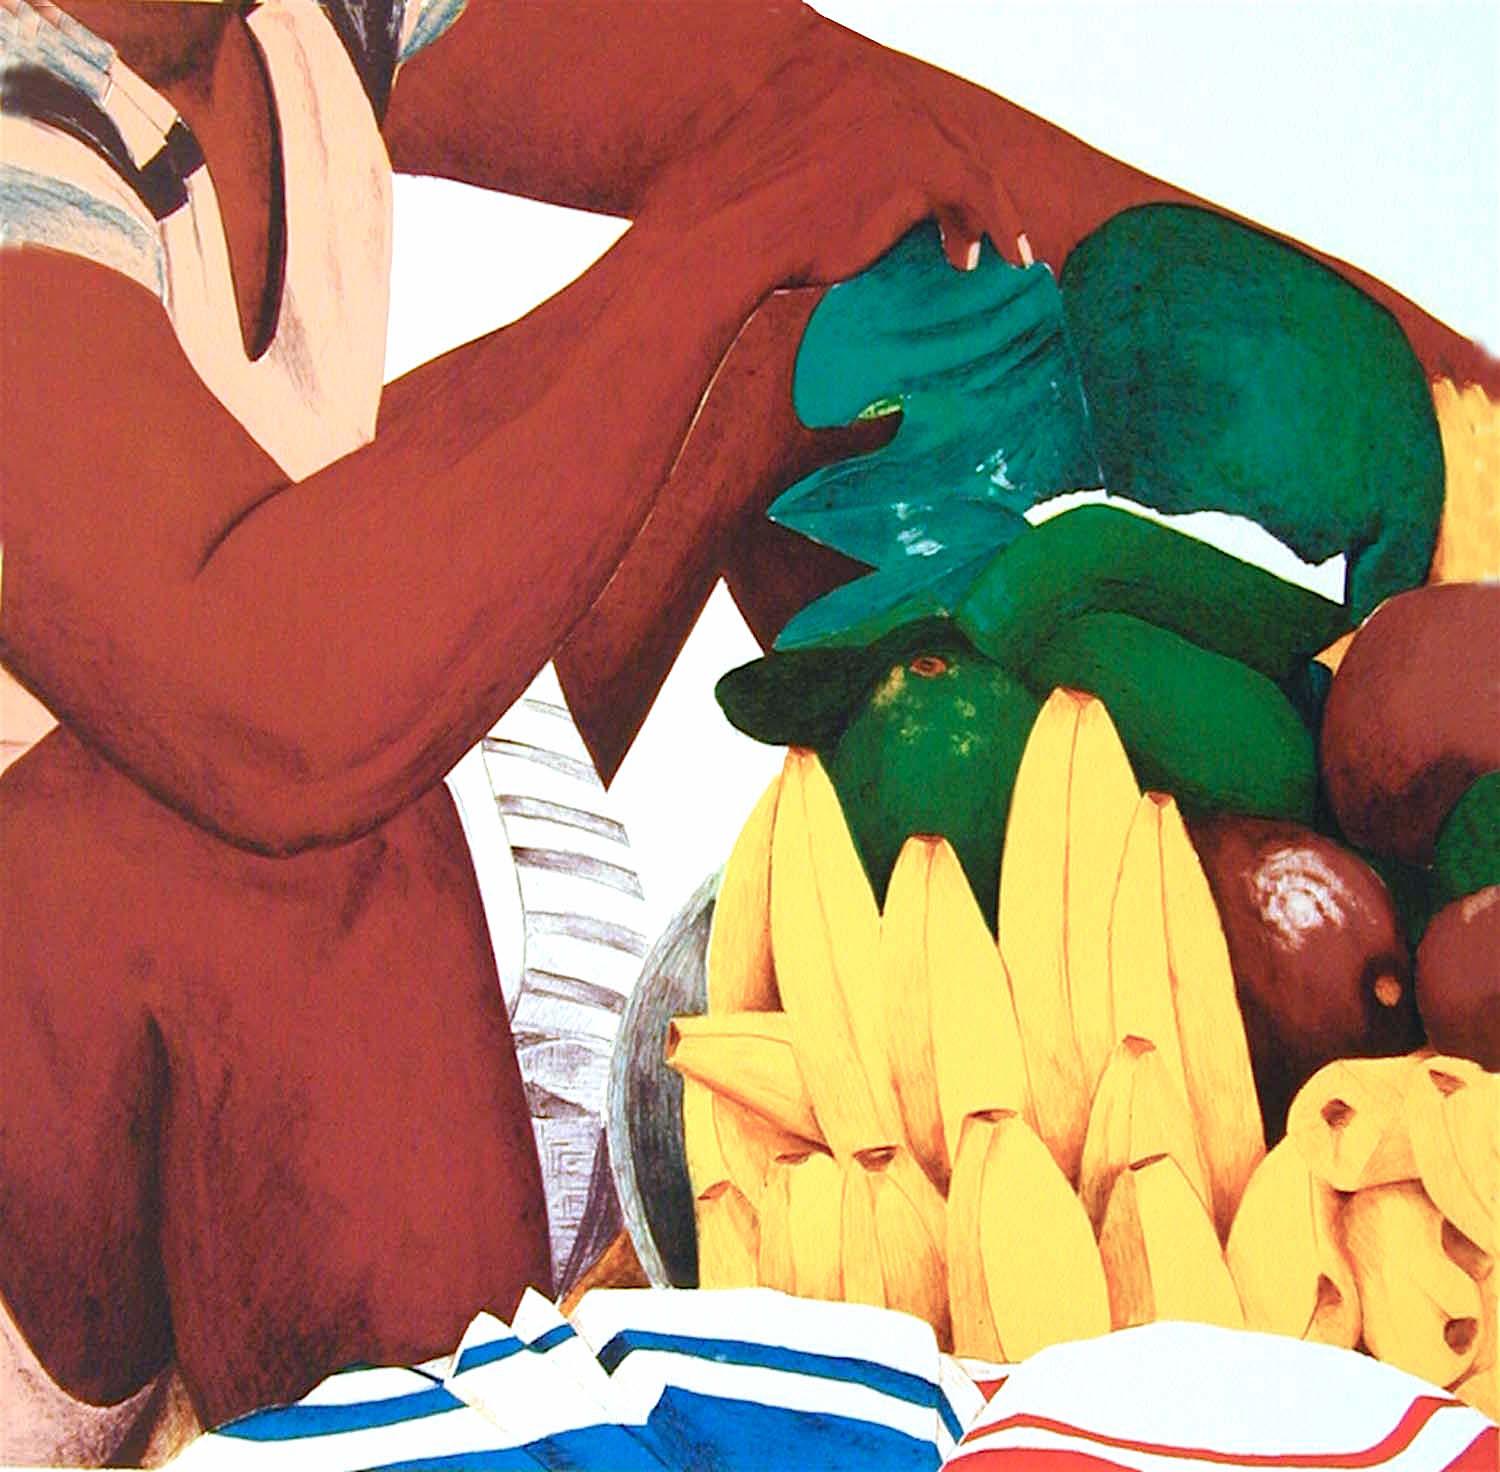 BAZURTO Cartagena Market Signed Lithograph, Afro-Colombian, Latin American Art  - Print by Ana Mercedes Hoyos